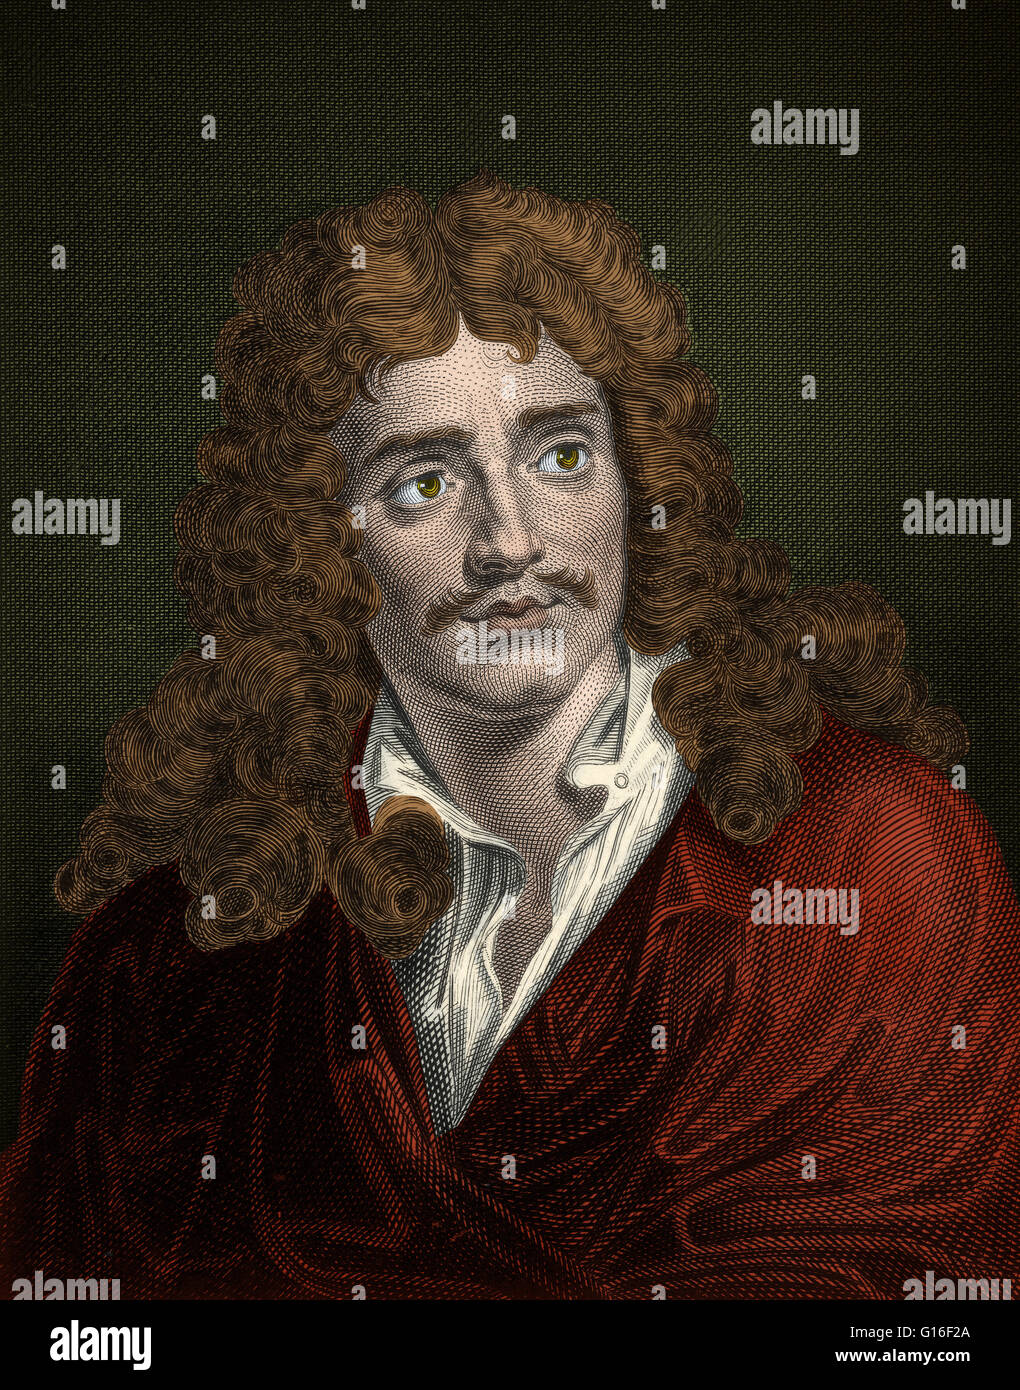 Jean-Baptiste Poquelin, known by his stage name Moliere (January 15,1622 - February 17,1673) was a French playwright and actor who is considered to be one of the greatest masters of comedy in Western literature. This image has been color enhanced. Stock Photo